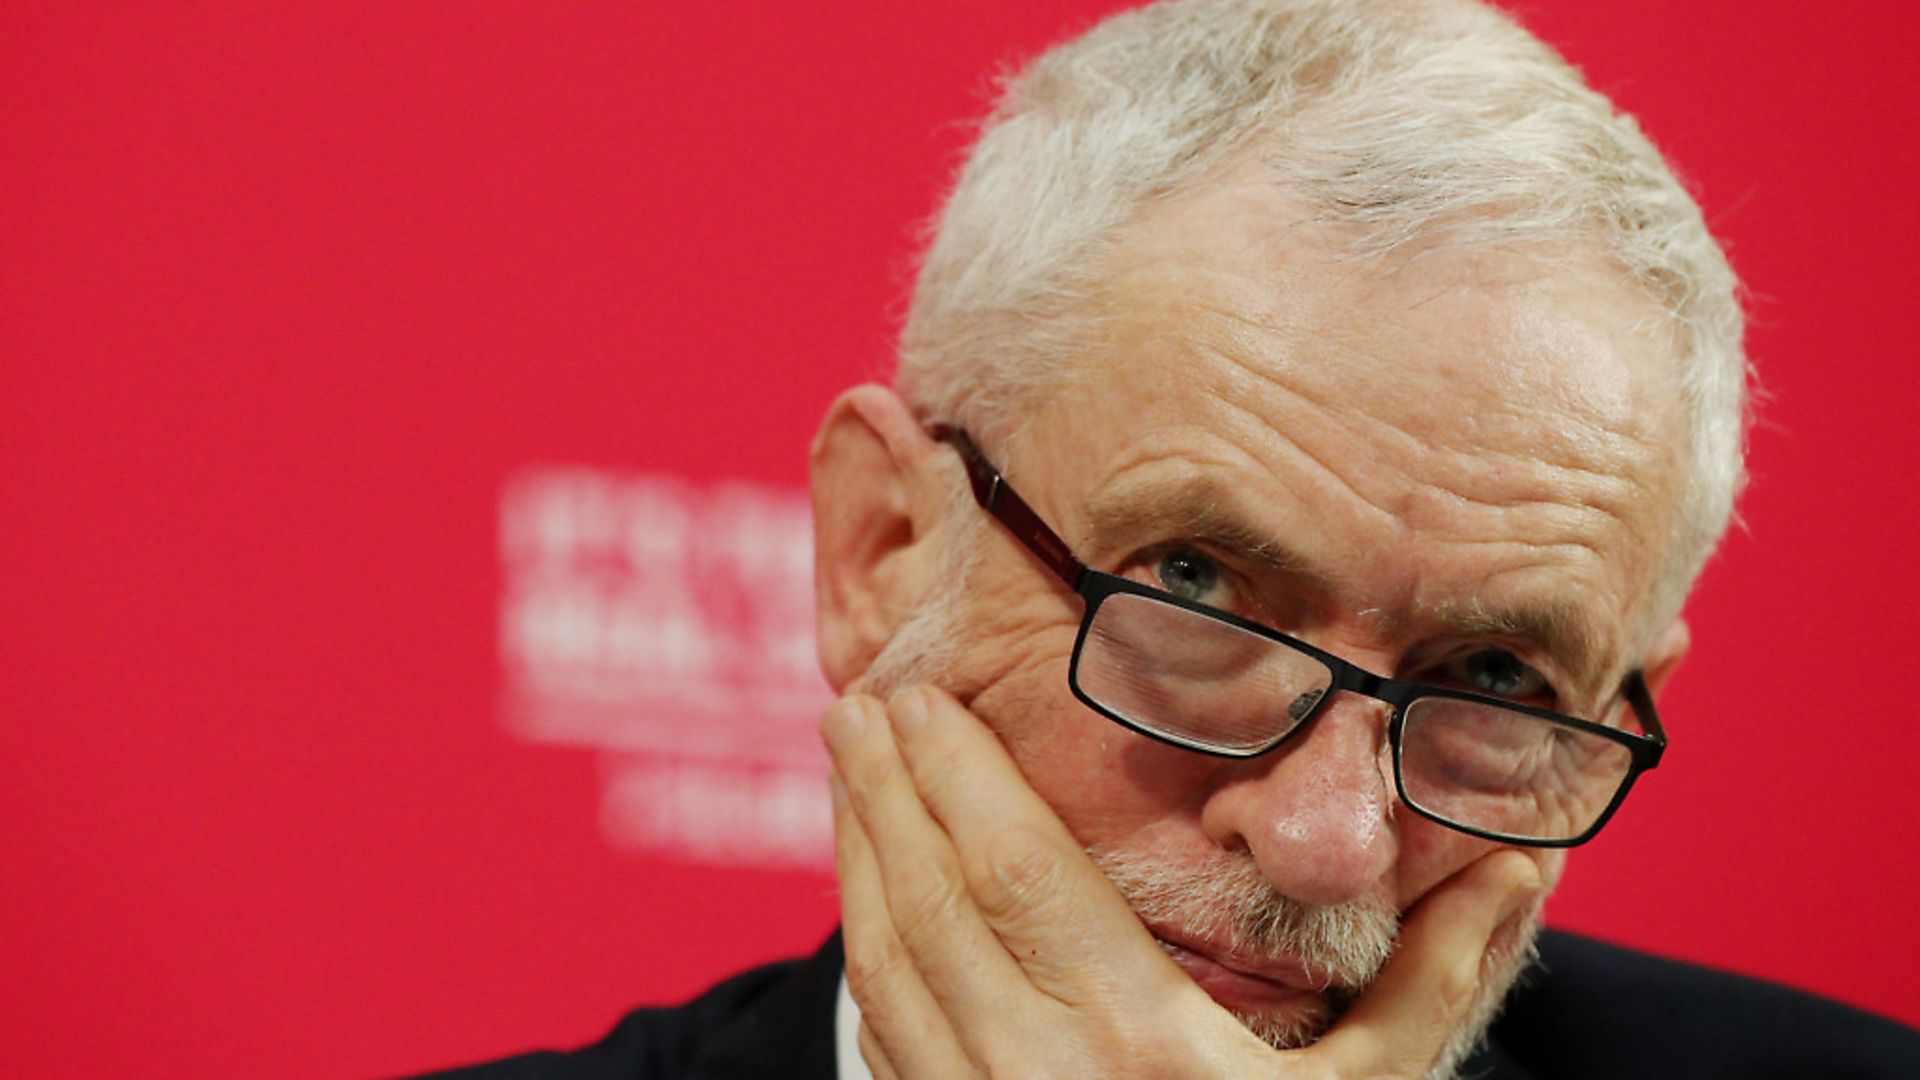 Labour Party leader Jeremy Corbyn faced calls to stand down in the aftermath of the general election exit poll. Picture: Jonathan Brady/PA Wire/PA Images - Credit: PA Wire/PA Images